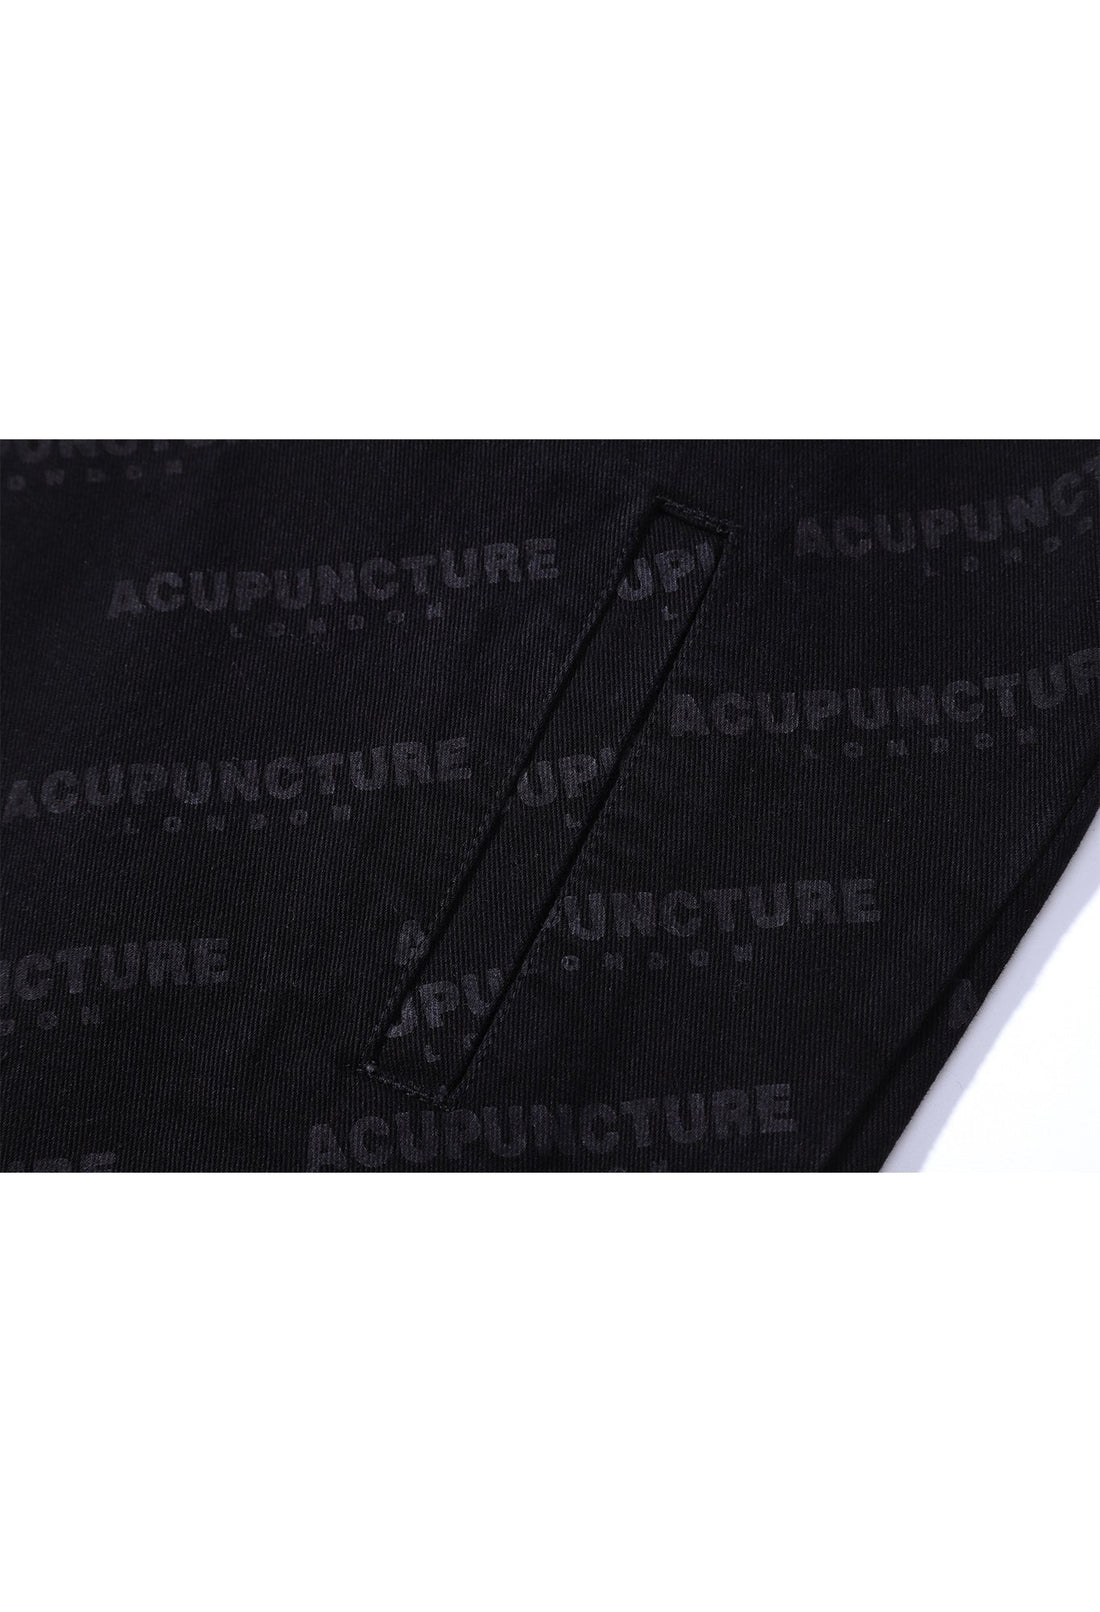 ALL-OVER SHACKET BLACK Acupuncture